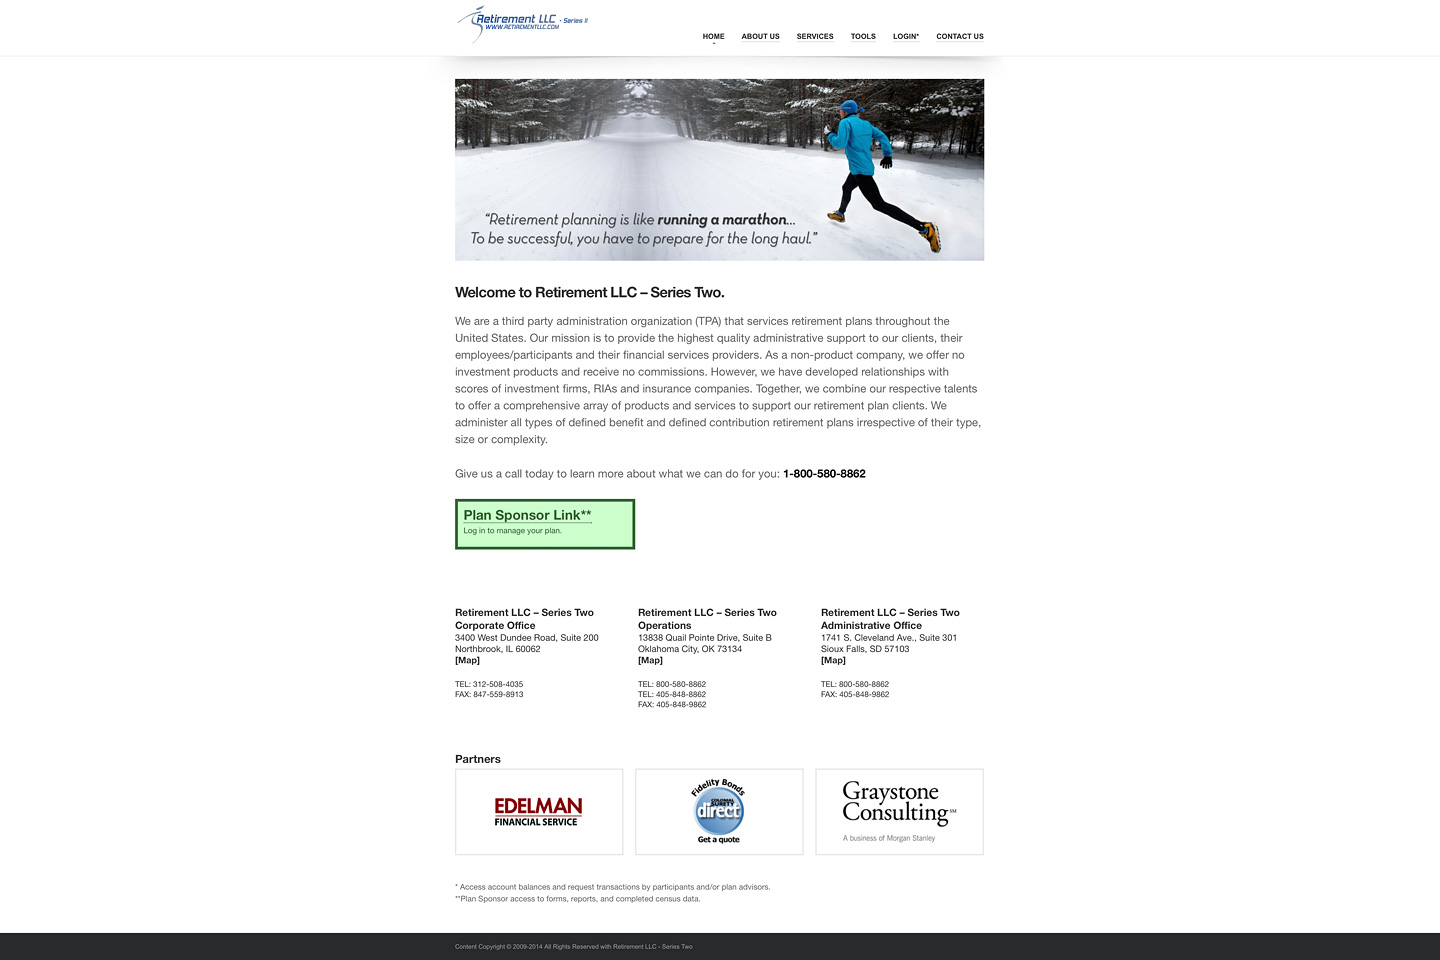 a screen capture of the retirementllc.com homepage which features a wide screen image carousel and a responsive layout